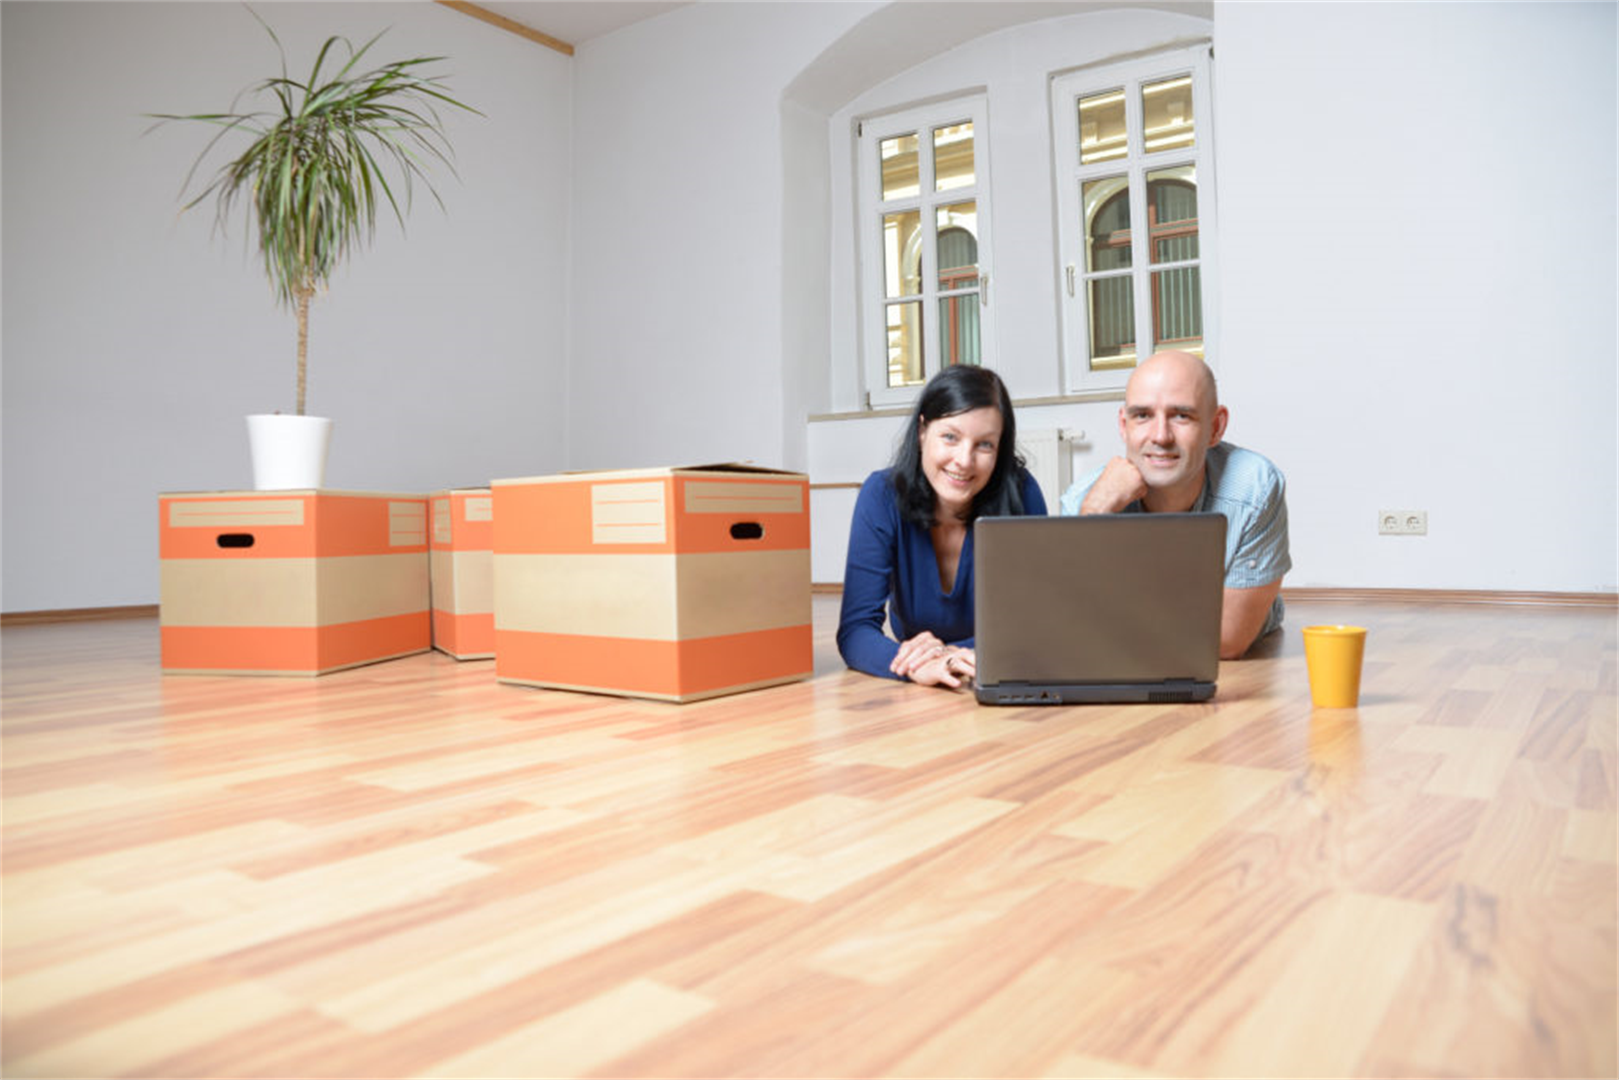 5 Questions to Ask When Looking for Tenants